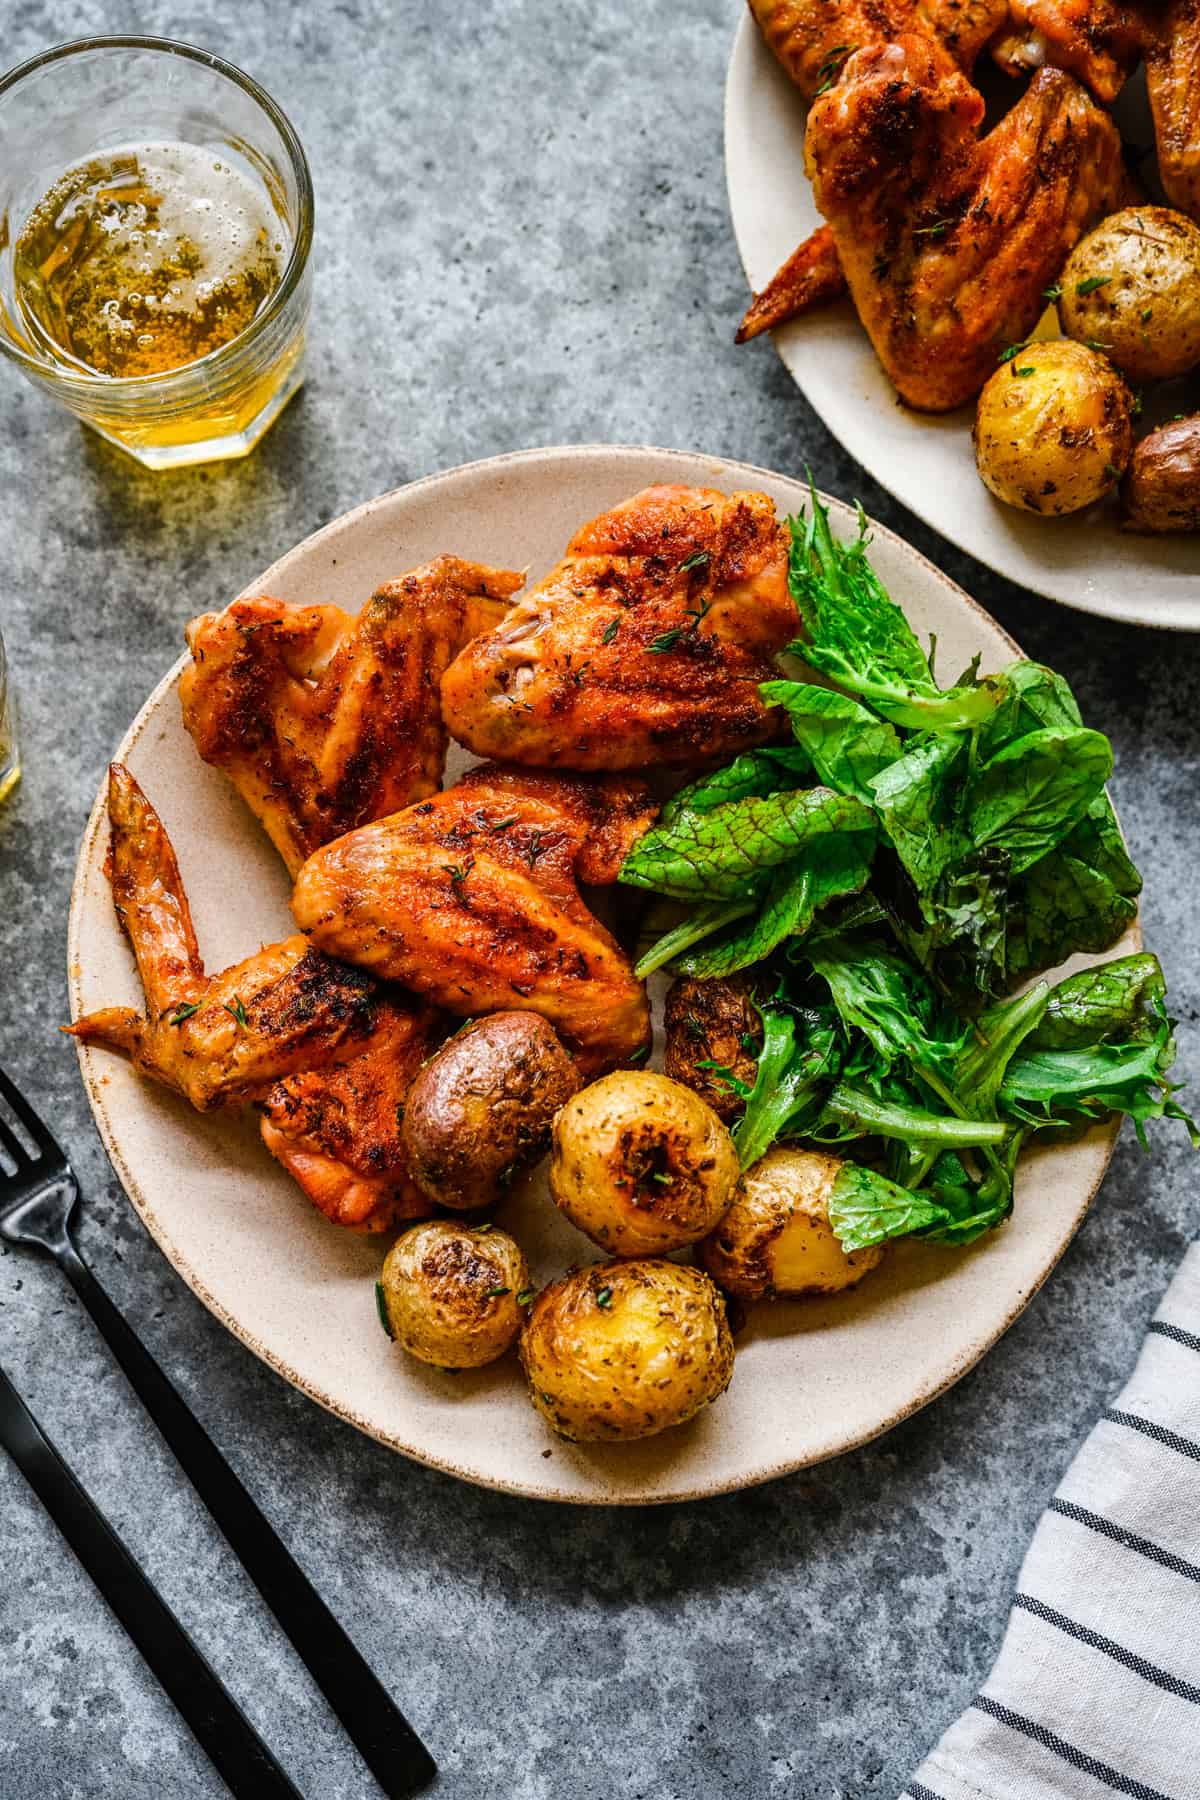 A plate with greens, potatoes, and baked whole chicken wings.